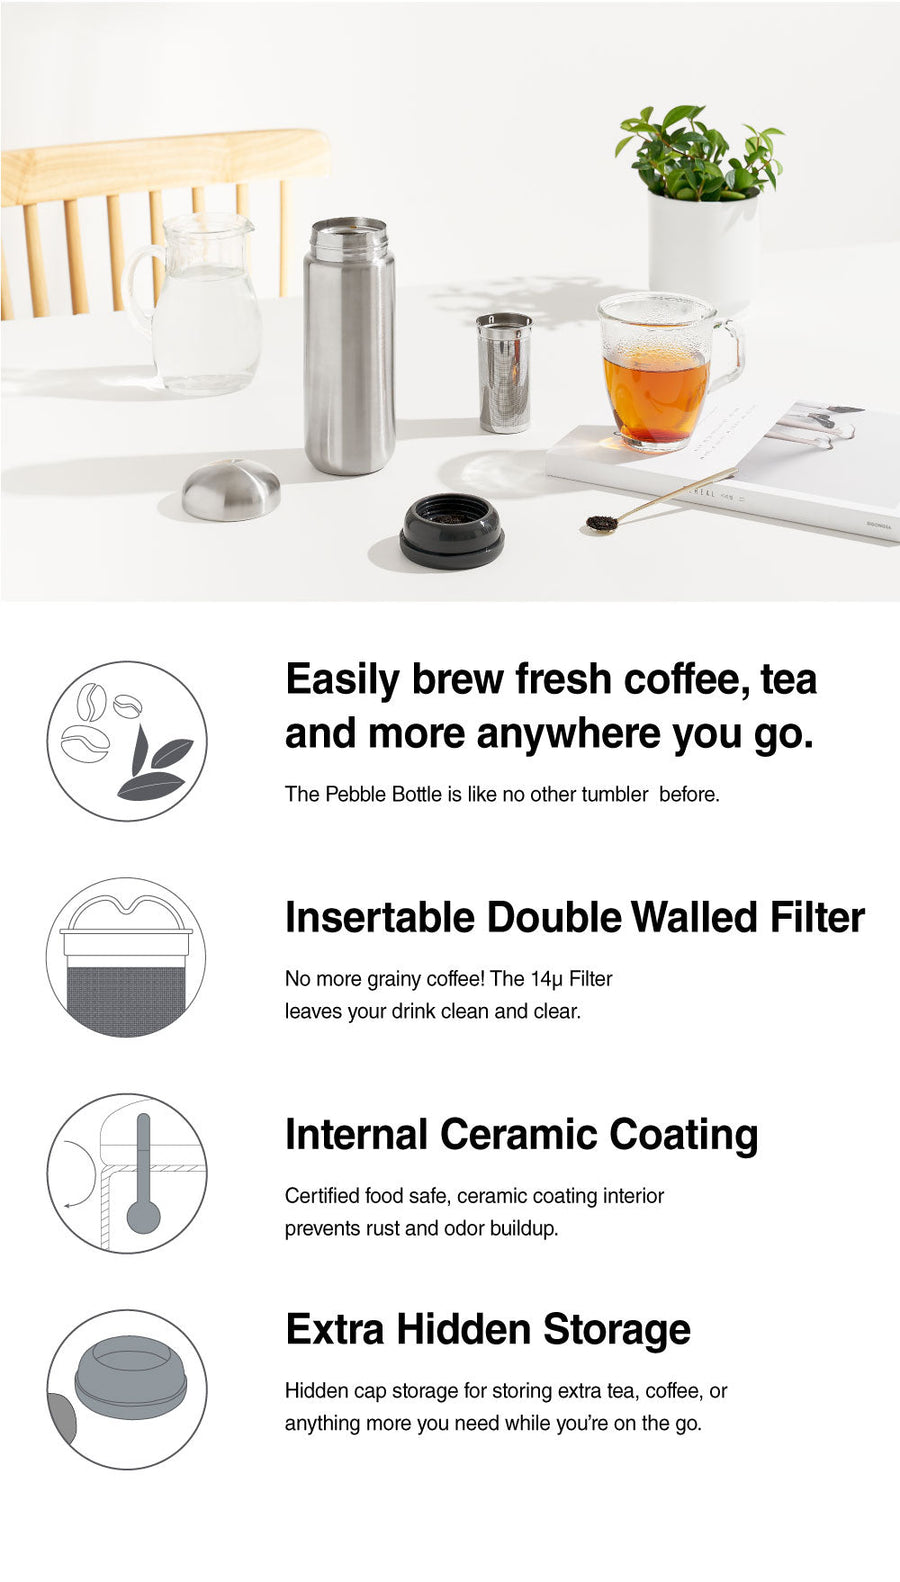 Pebble Bottle - Easily brew fresh coffee, tea and more anywhere you go.